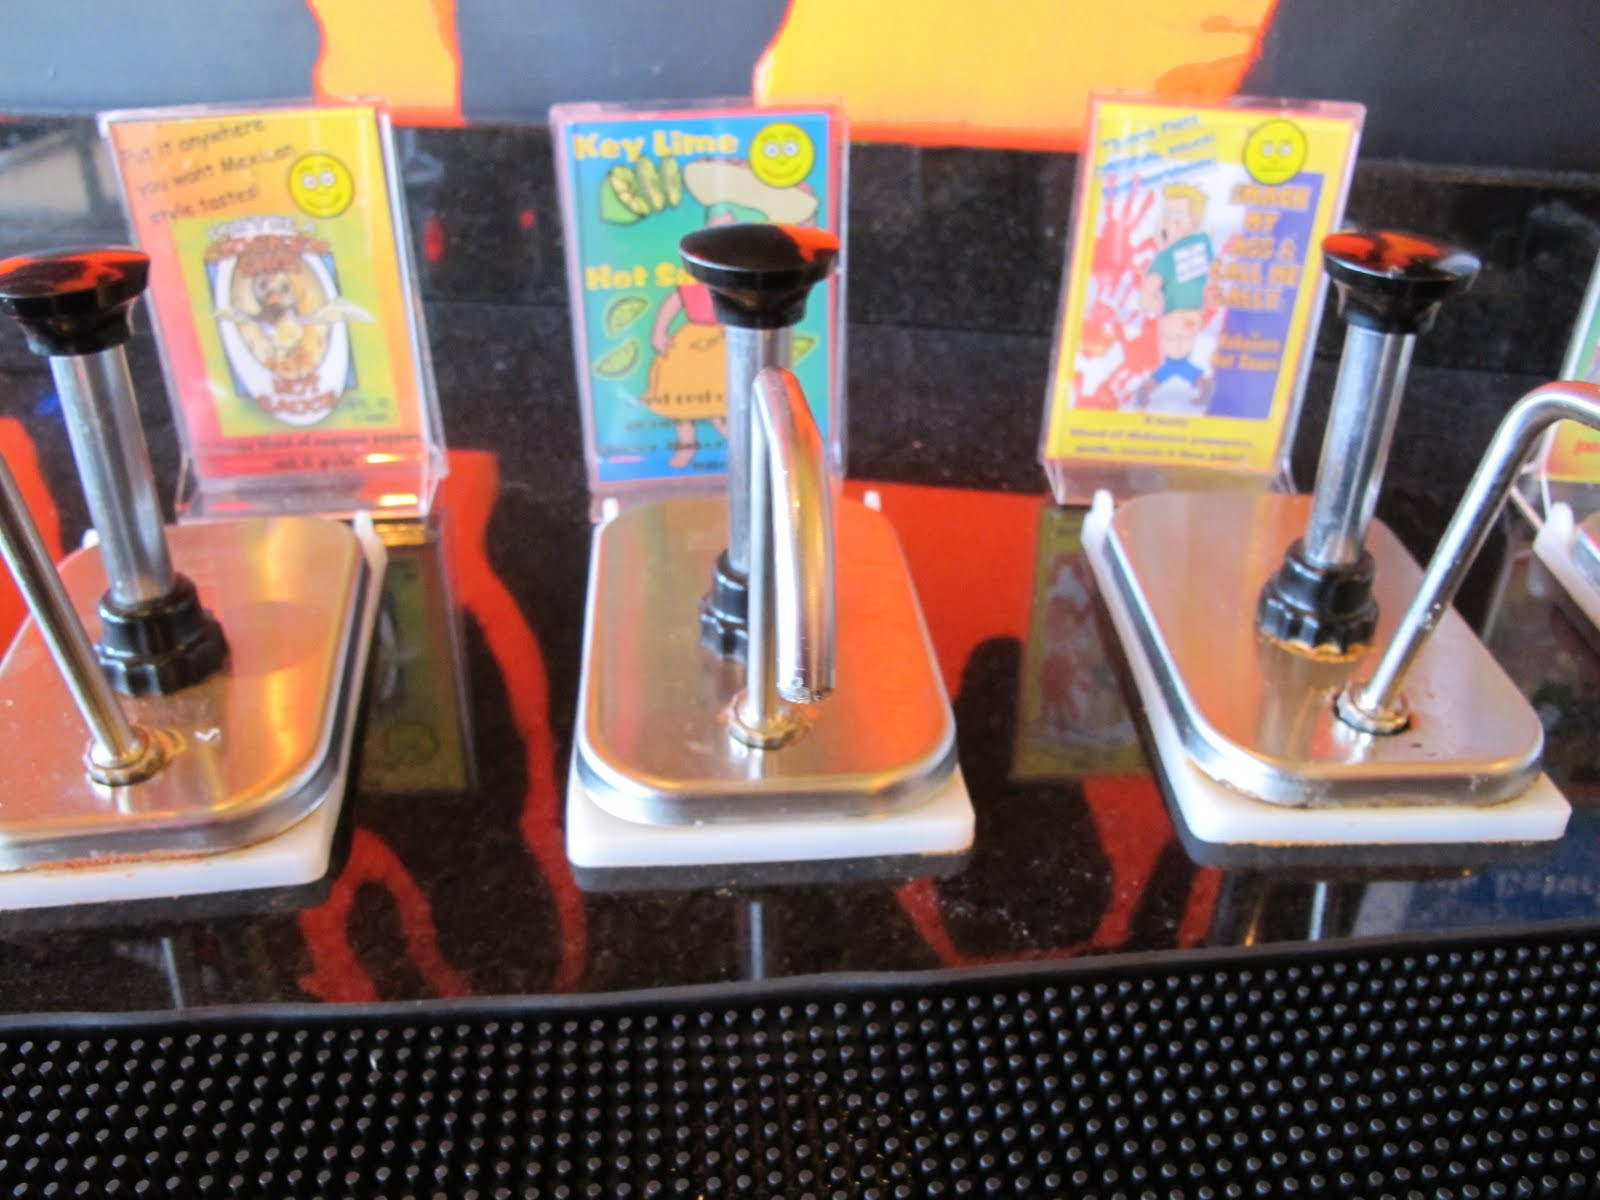 Tijuana Flats Sauces
 Get Excited About Cooking A Visit to "Tijuana Flats" in